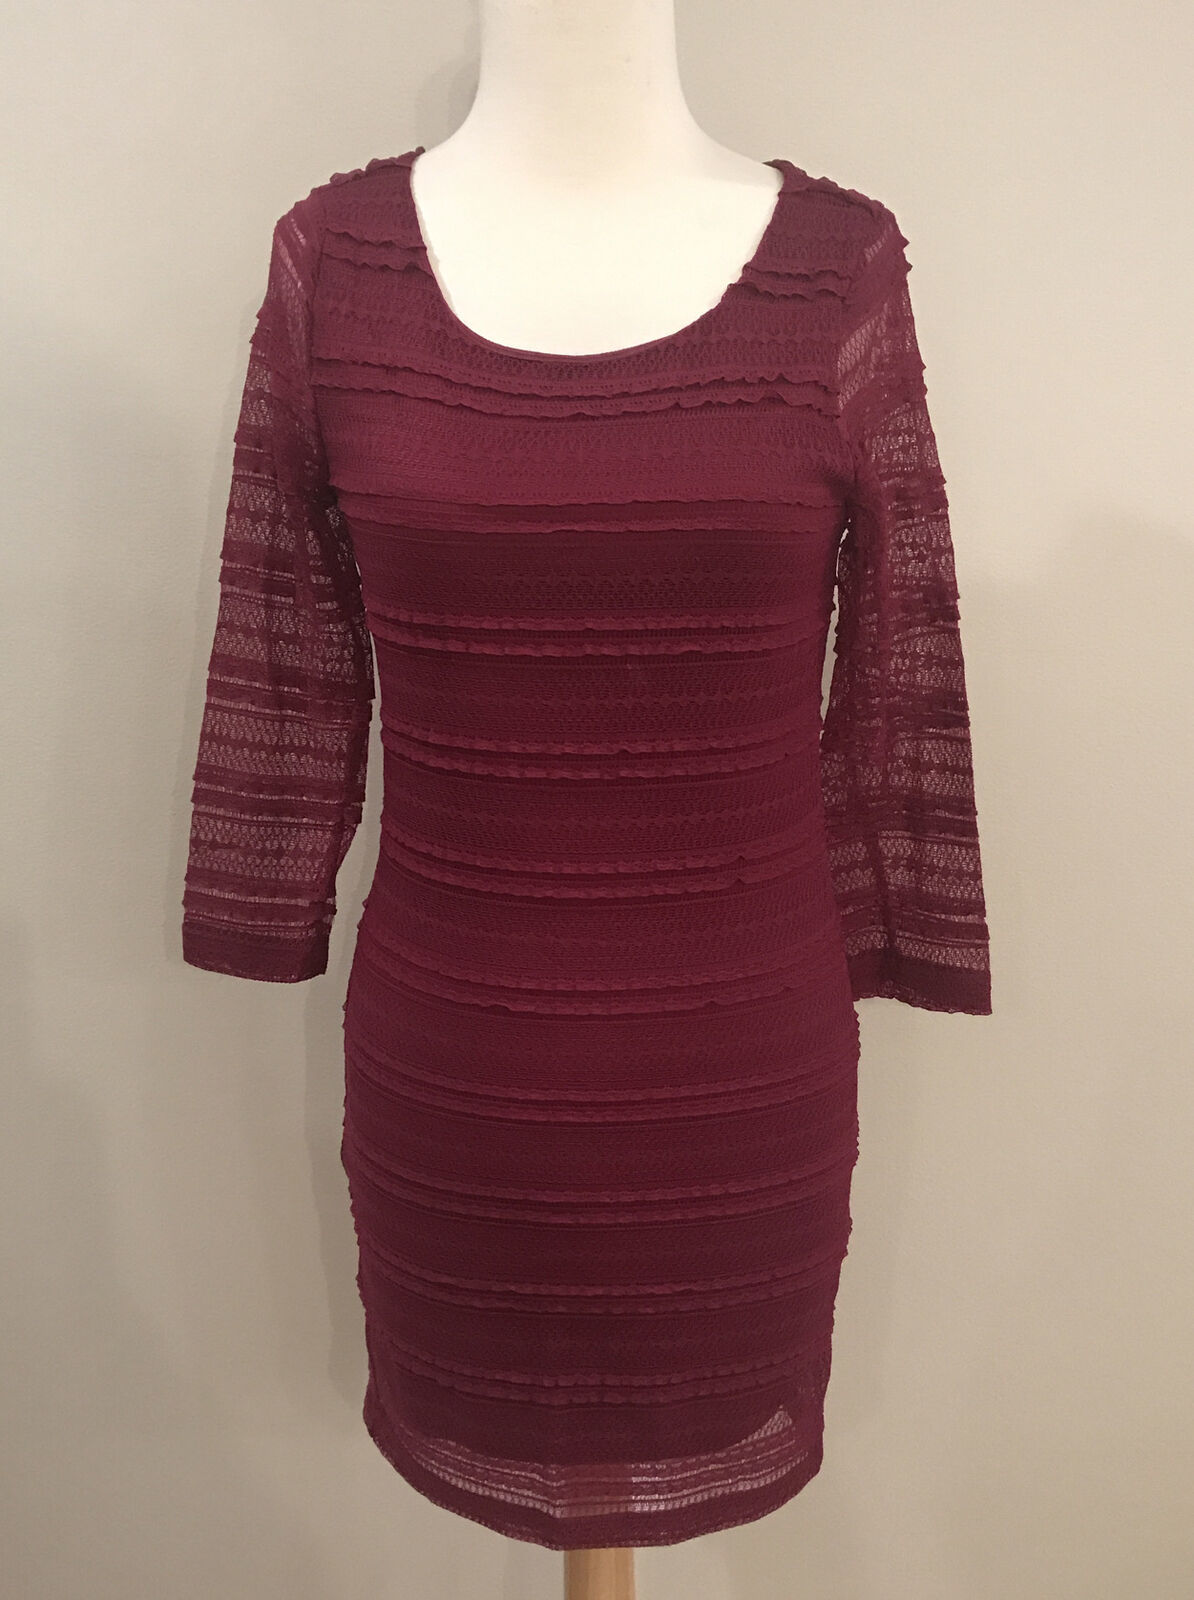 Primary image for Forever 21 Long Sleeve Sheer Lace Mini Dress Burgundy Red Lined Size Small